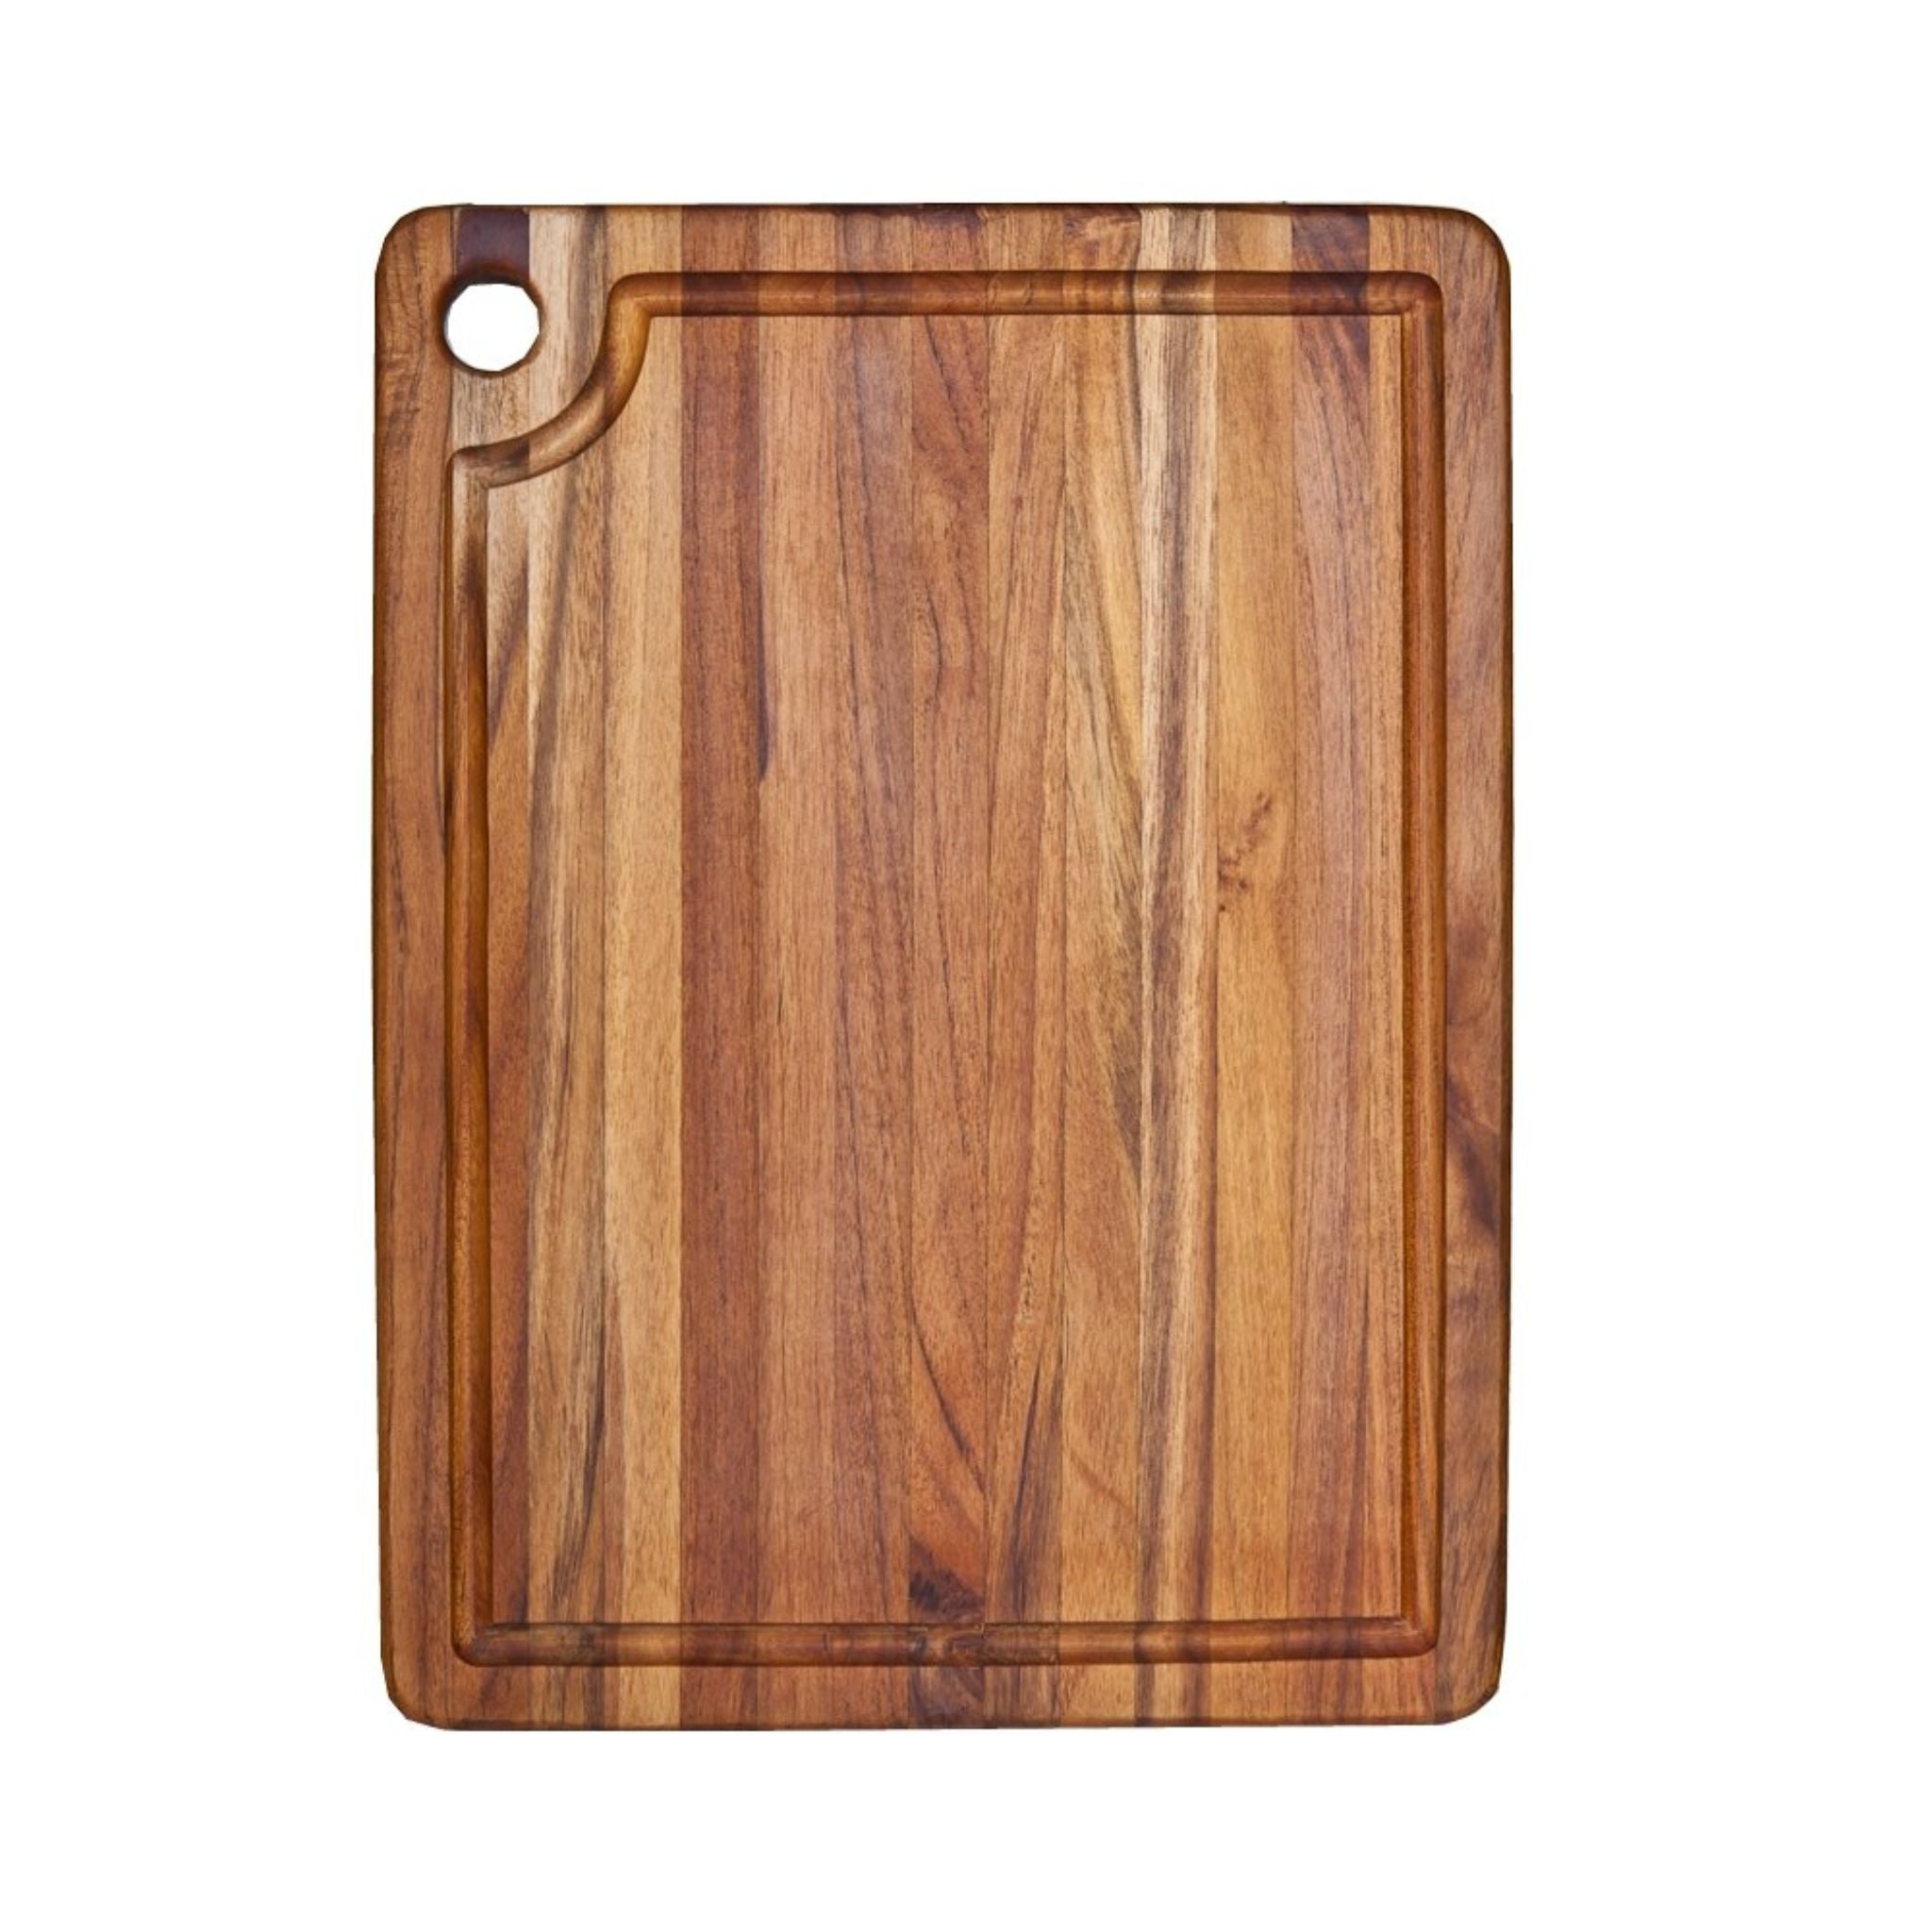 Teakhaus Corner Hole Cutting/Serving Board with Juice Groove (46 cm x 35.5 cm x 1.9 cm / 18 x 14 x 0.75 inch)